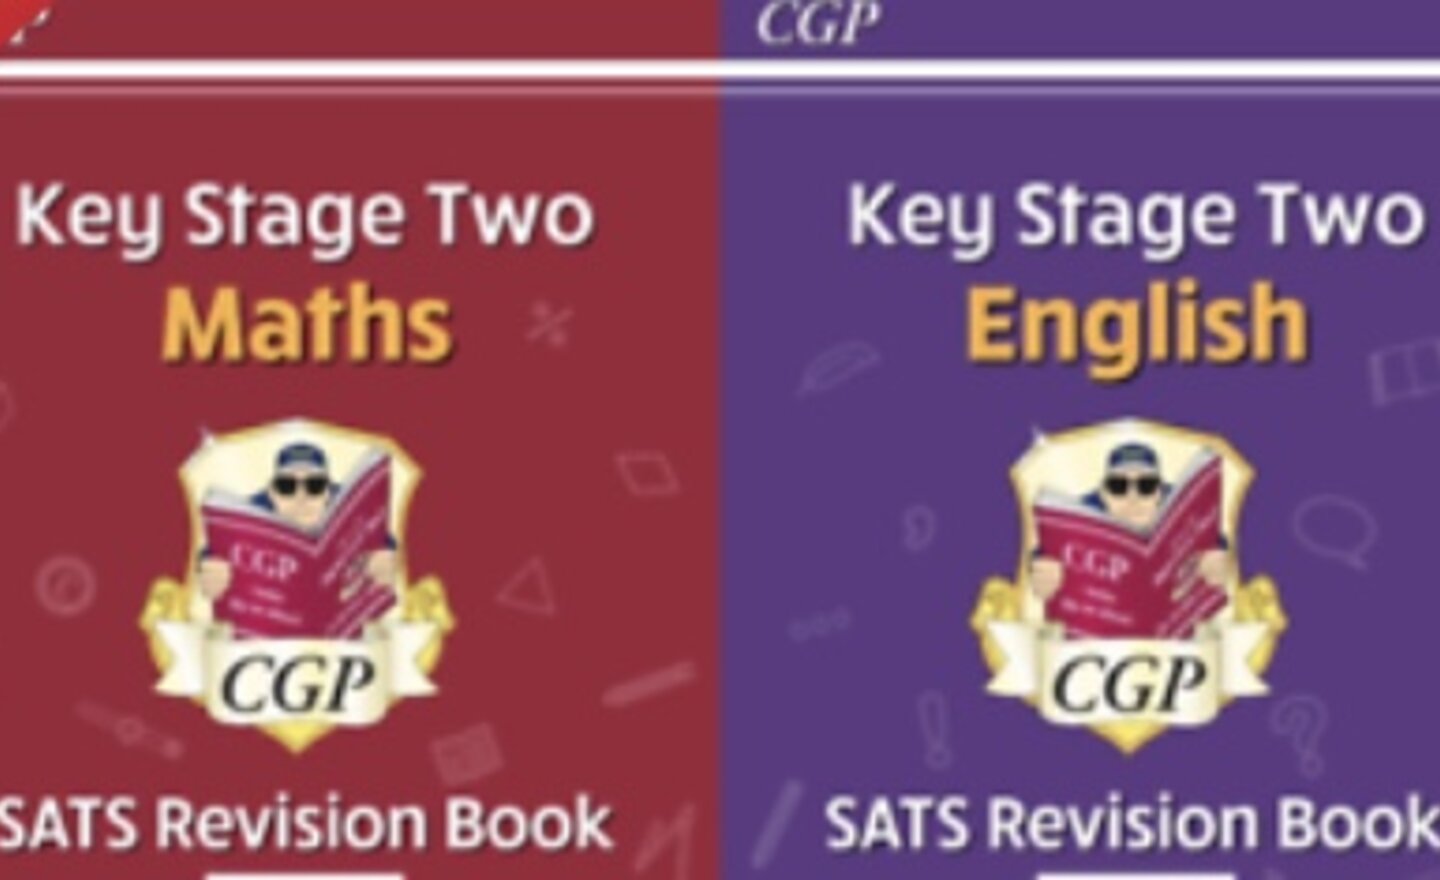 Image of Revision Books